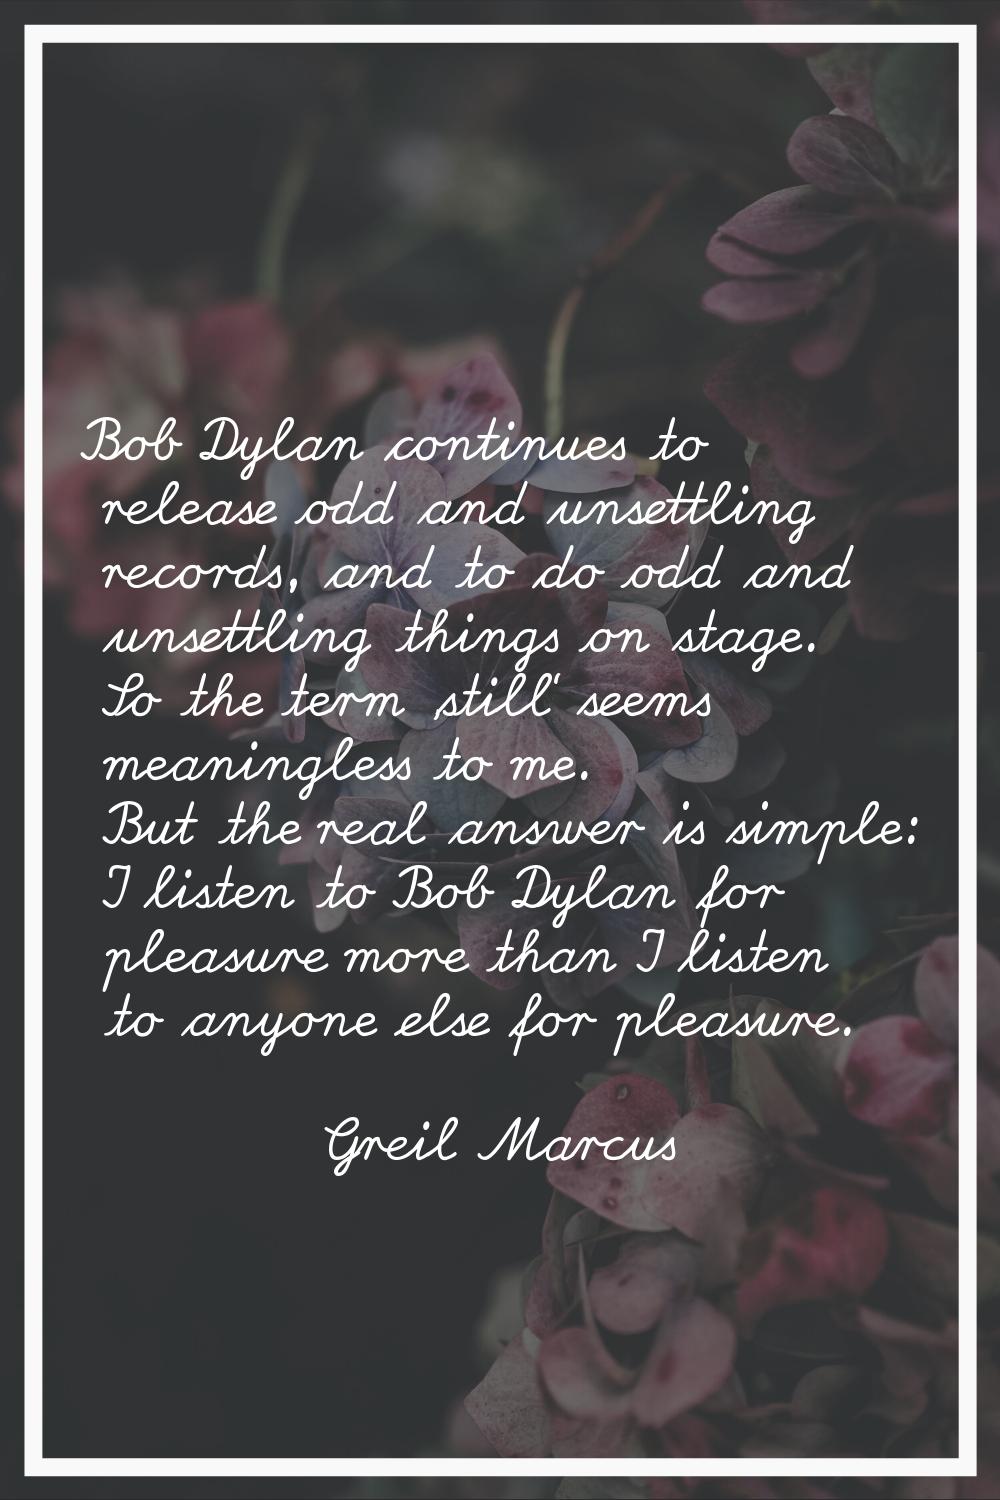 Bob Dylan continues to release odd and unsettling records, and to do odd and unsettling things on s